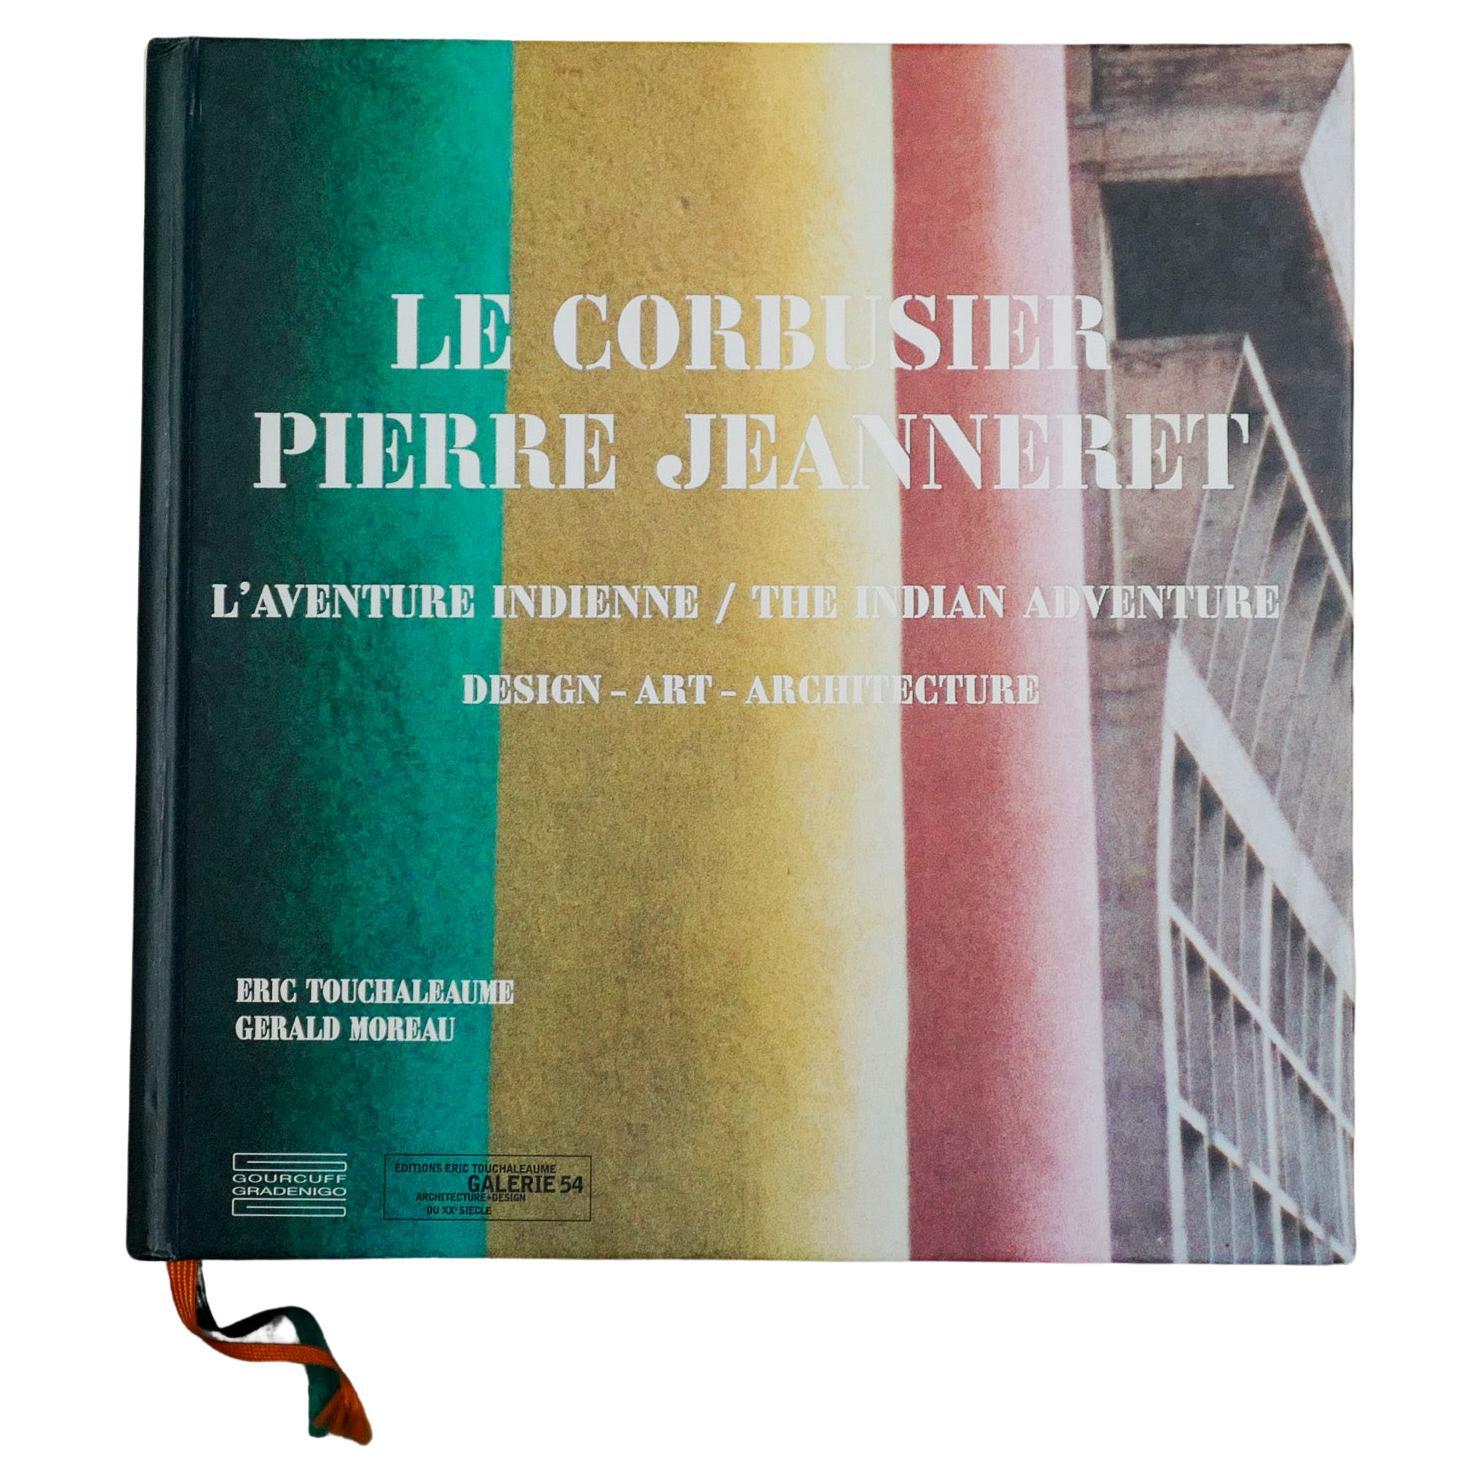 Pierre Jeanneret / Le Corbusier "The Indian Adventure" Book About Chandigarh For Sale